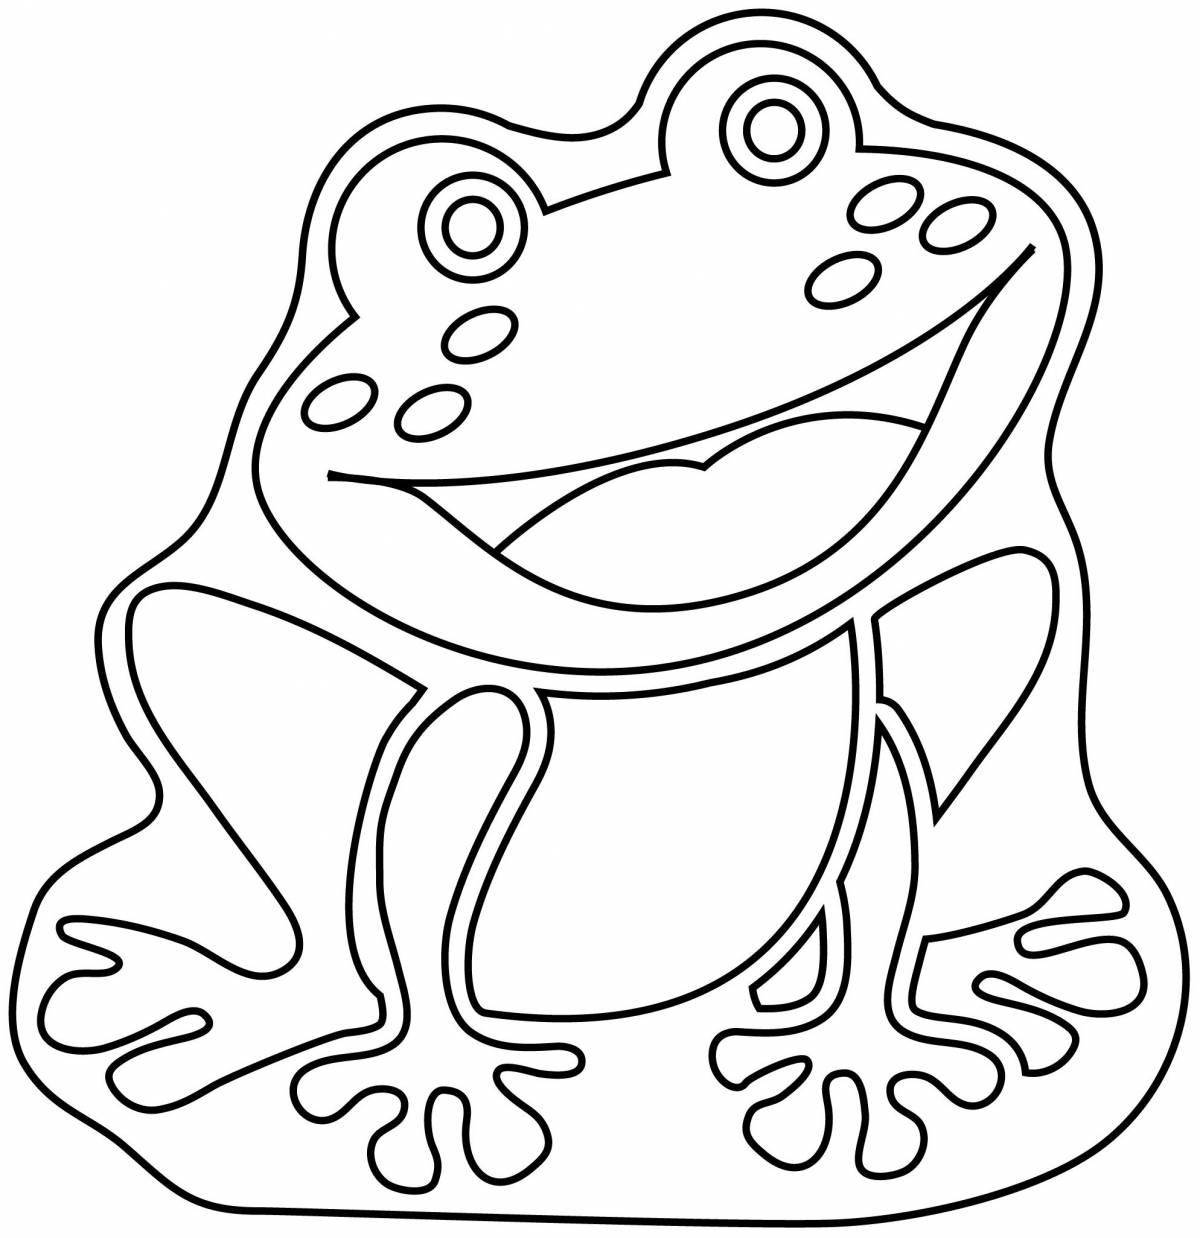 Coloring book magic fly agaric frog